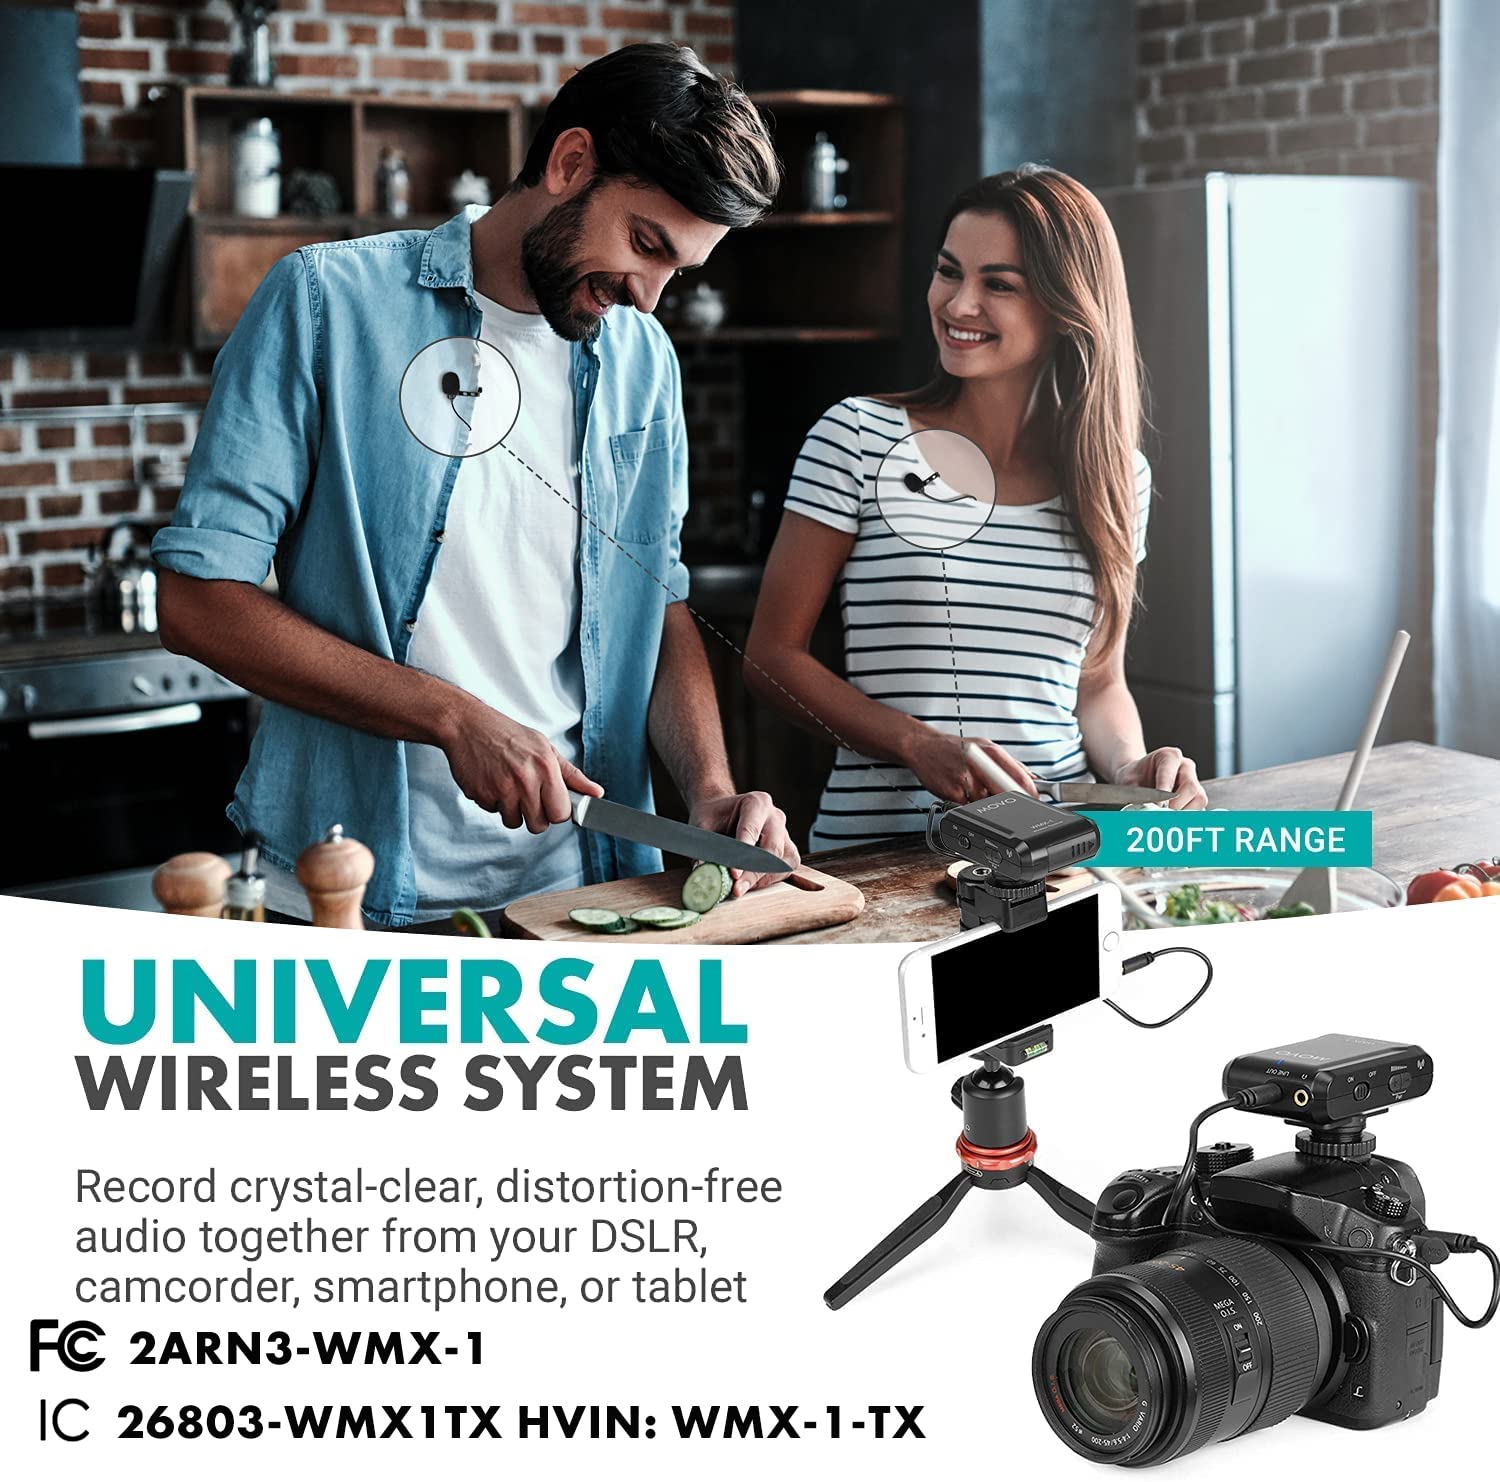 Movo WMX-1-DUO 2.4GHz Dual Wireless Lavalier Microphone System, Compatible with DSLR Cameras, Camcorders, iPhone, Android Smartphones, and Tablets, 200ft Audio Range, Great for Teaching Tutorials  - Very Good